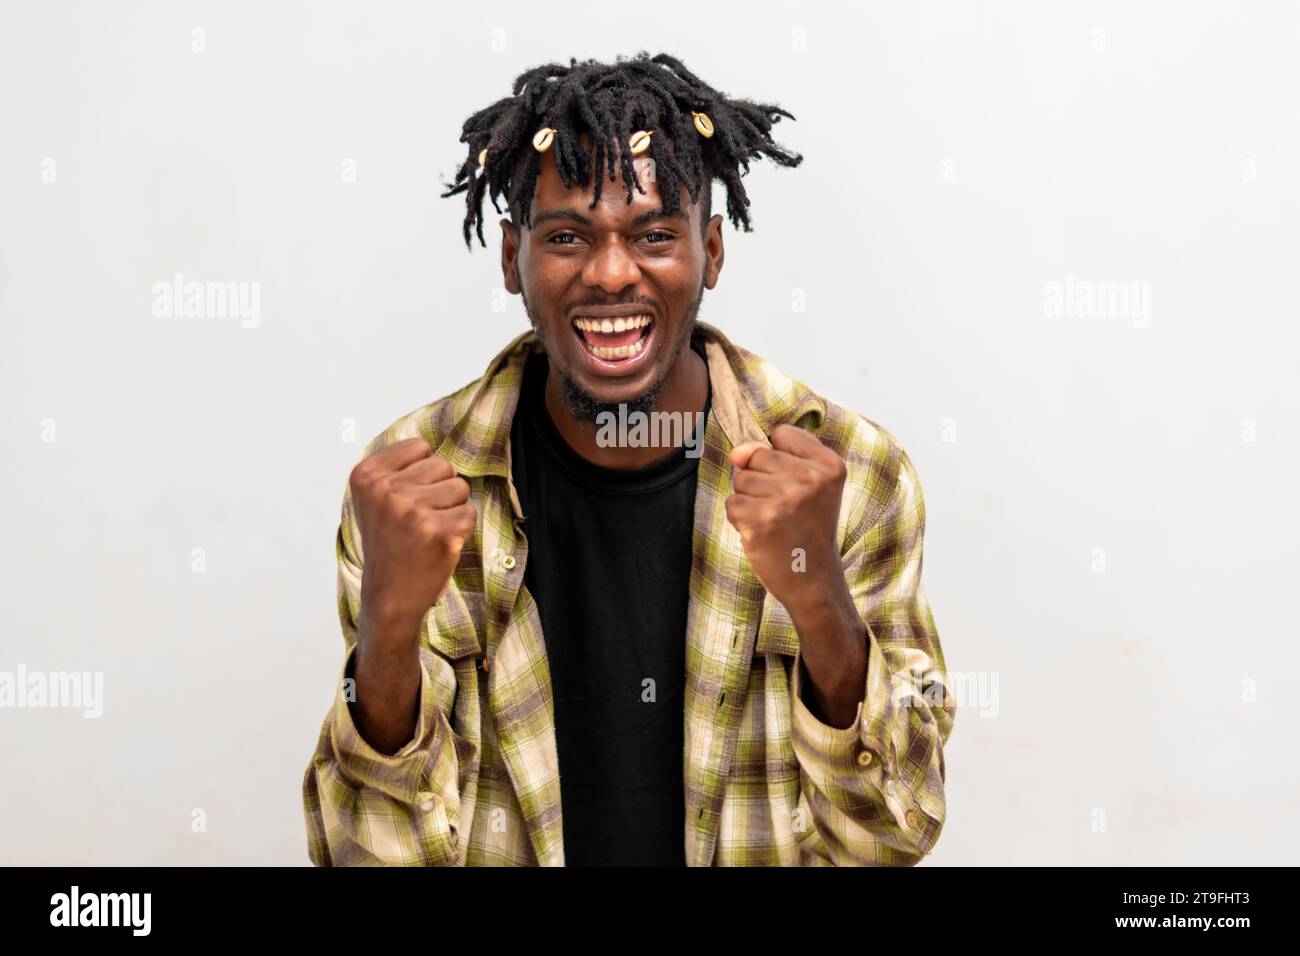 excited young black guy on dreadlocks raising fist up on white background, celebrating success. Happy african millennial man sharing positive emotions Stock Photo